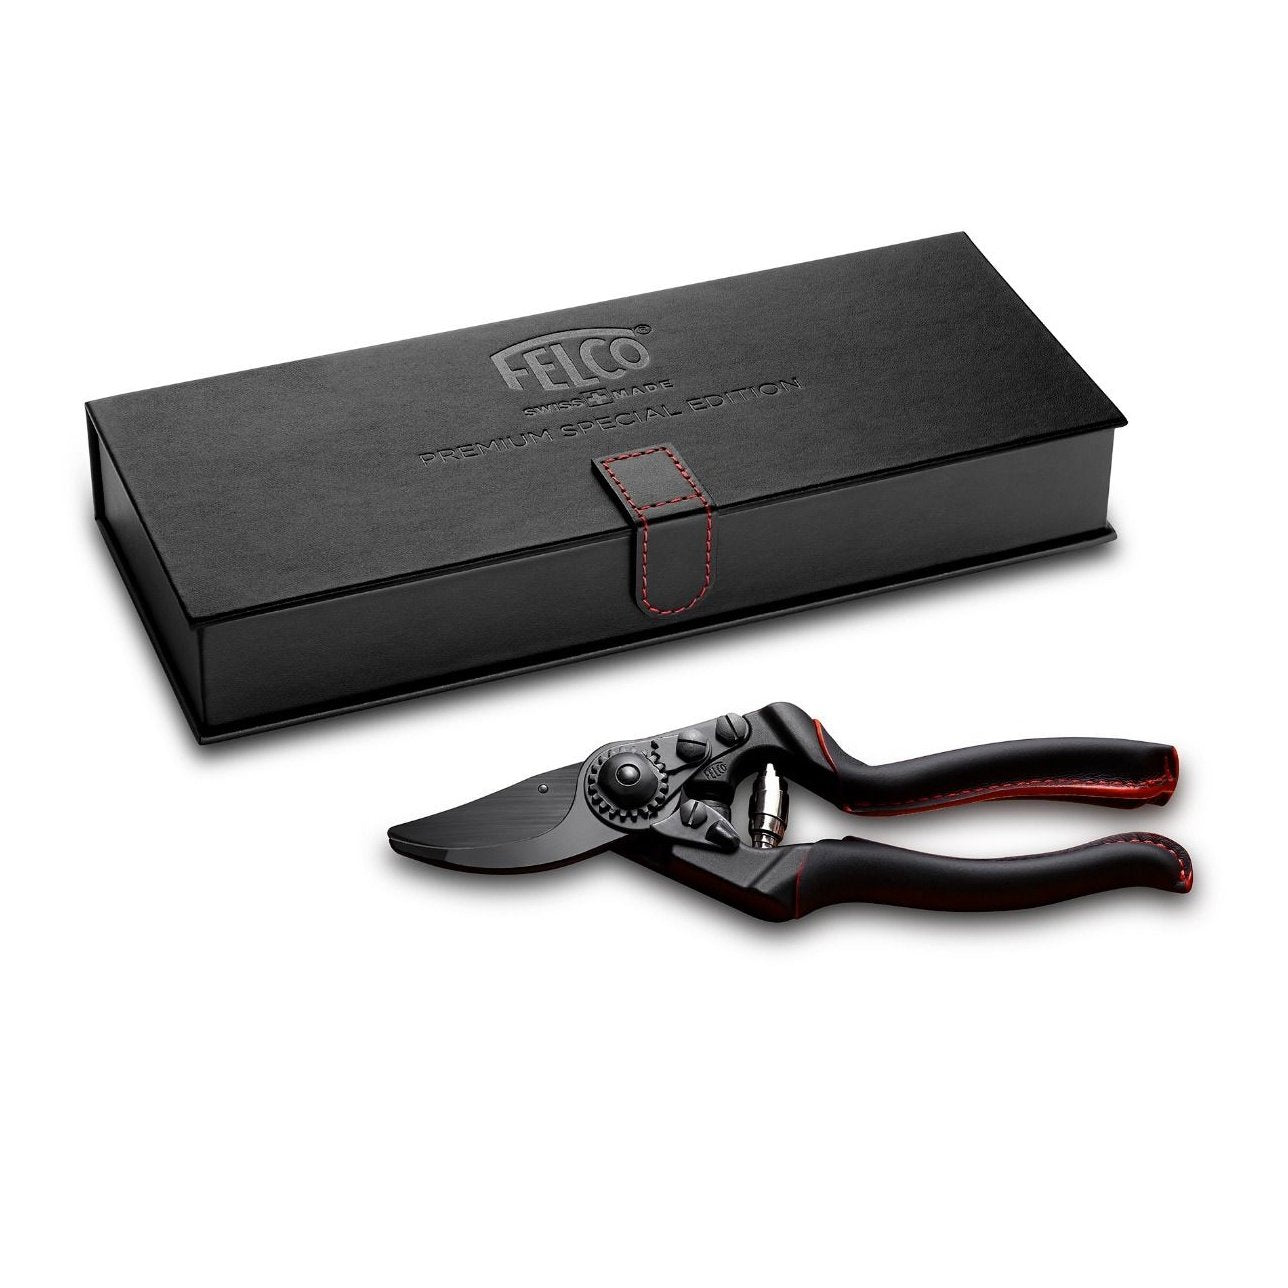 Felco Bypass Pruner 8 Premium Special Edition F-8PSE